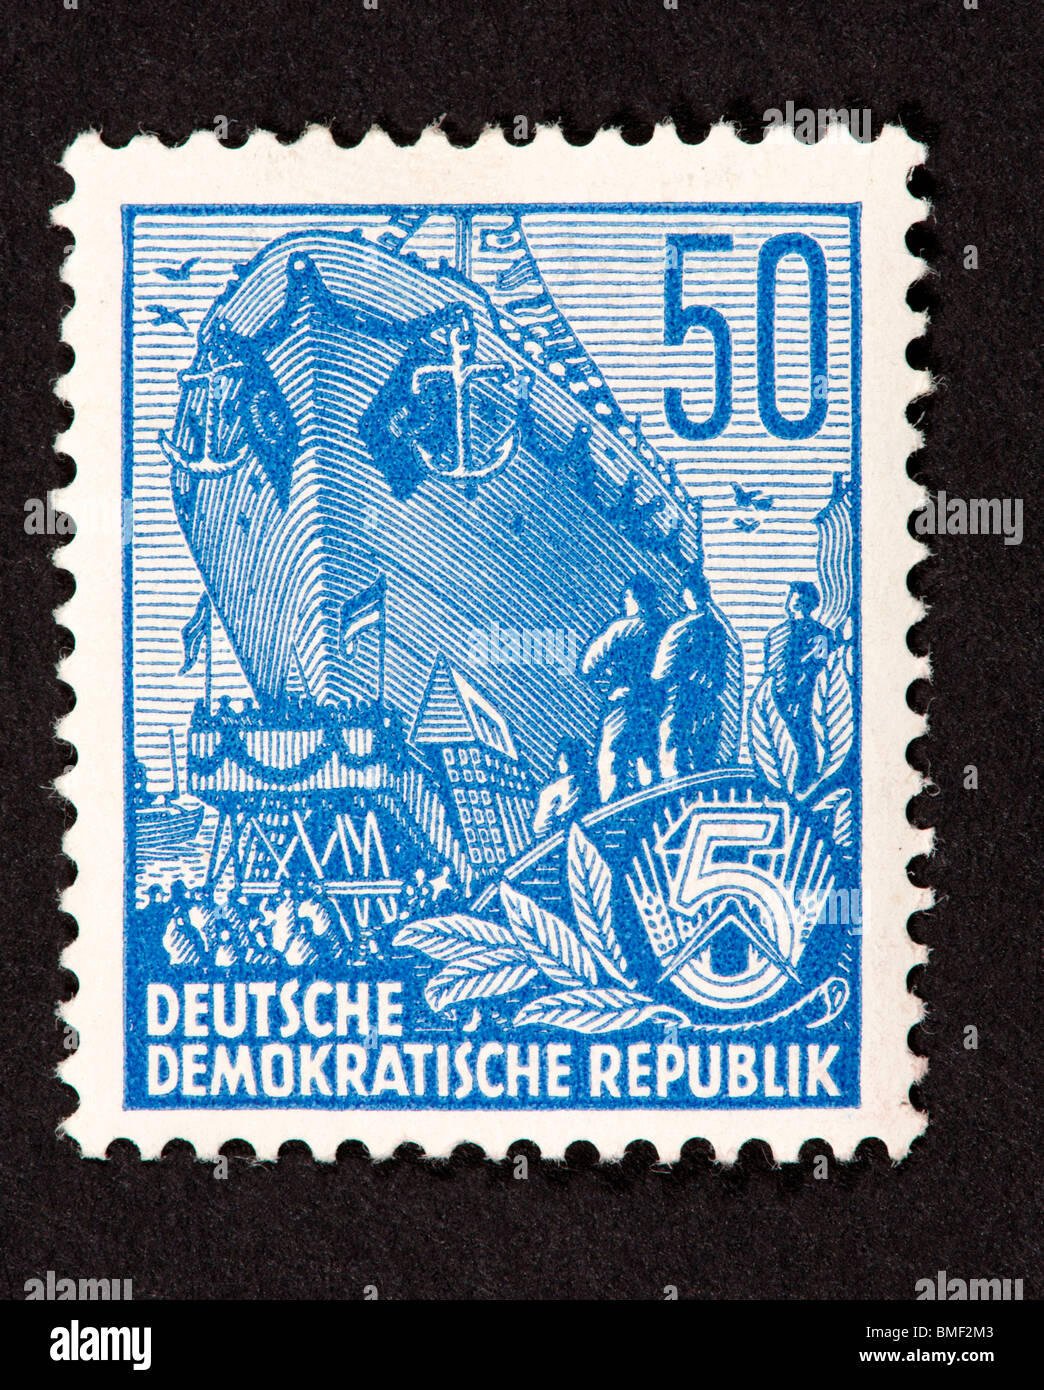 Postage stamp from East Germany (German Democratic Republic) depicting a ship launching. Stock Photo